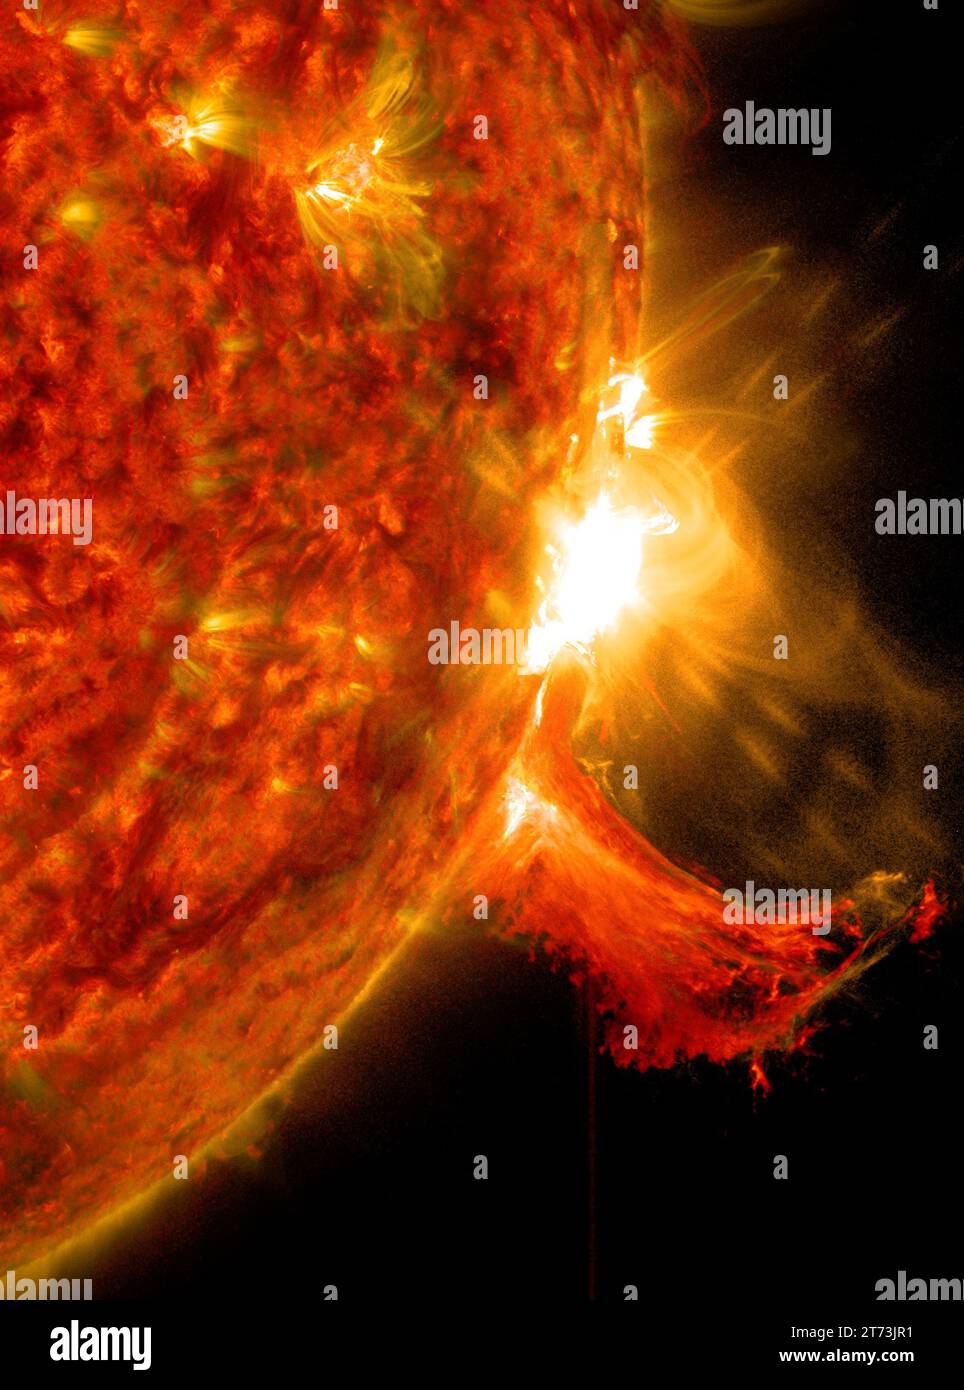 NASA's Solar Dynamics Observatory captured these images of a solar flare on Oct. 2, 2014. The solar flare is the bright flash of light on the right li Stock Photo